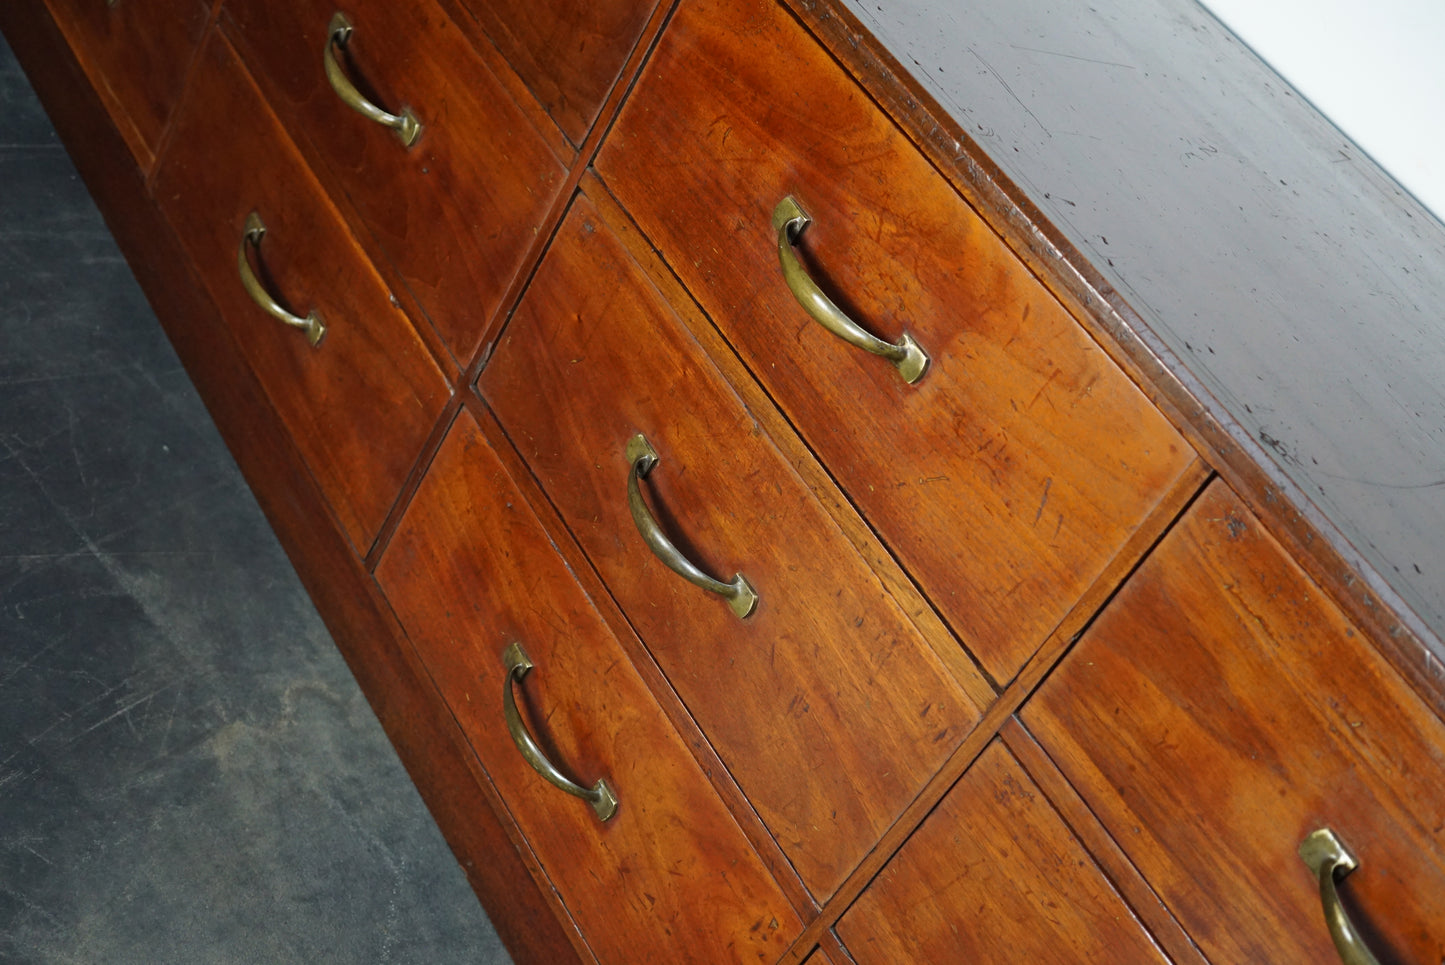 Large French Mahogany Apothecary Cabinet / Drapers Chest, Early 20th Century